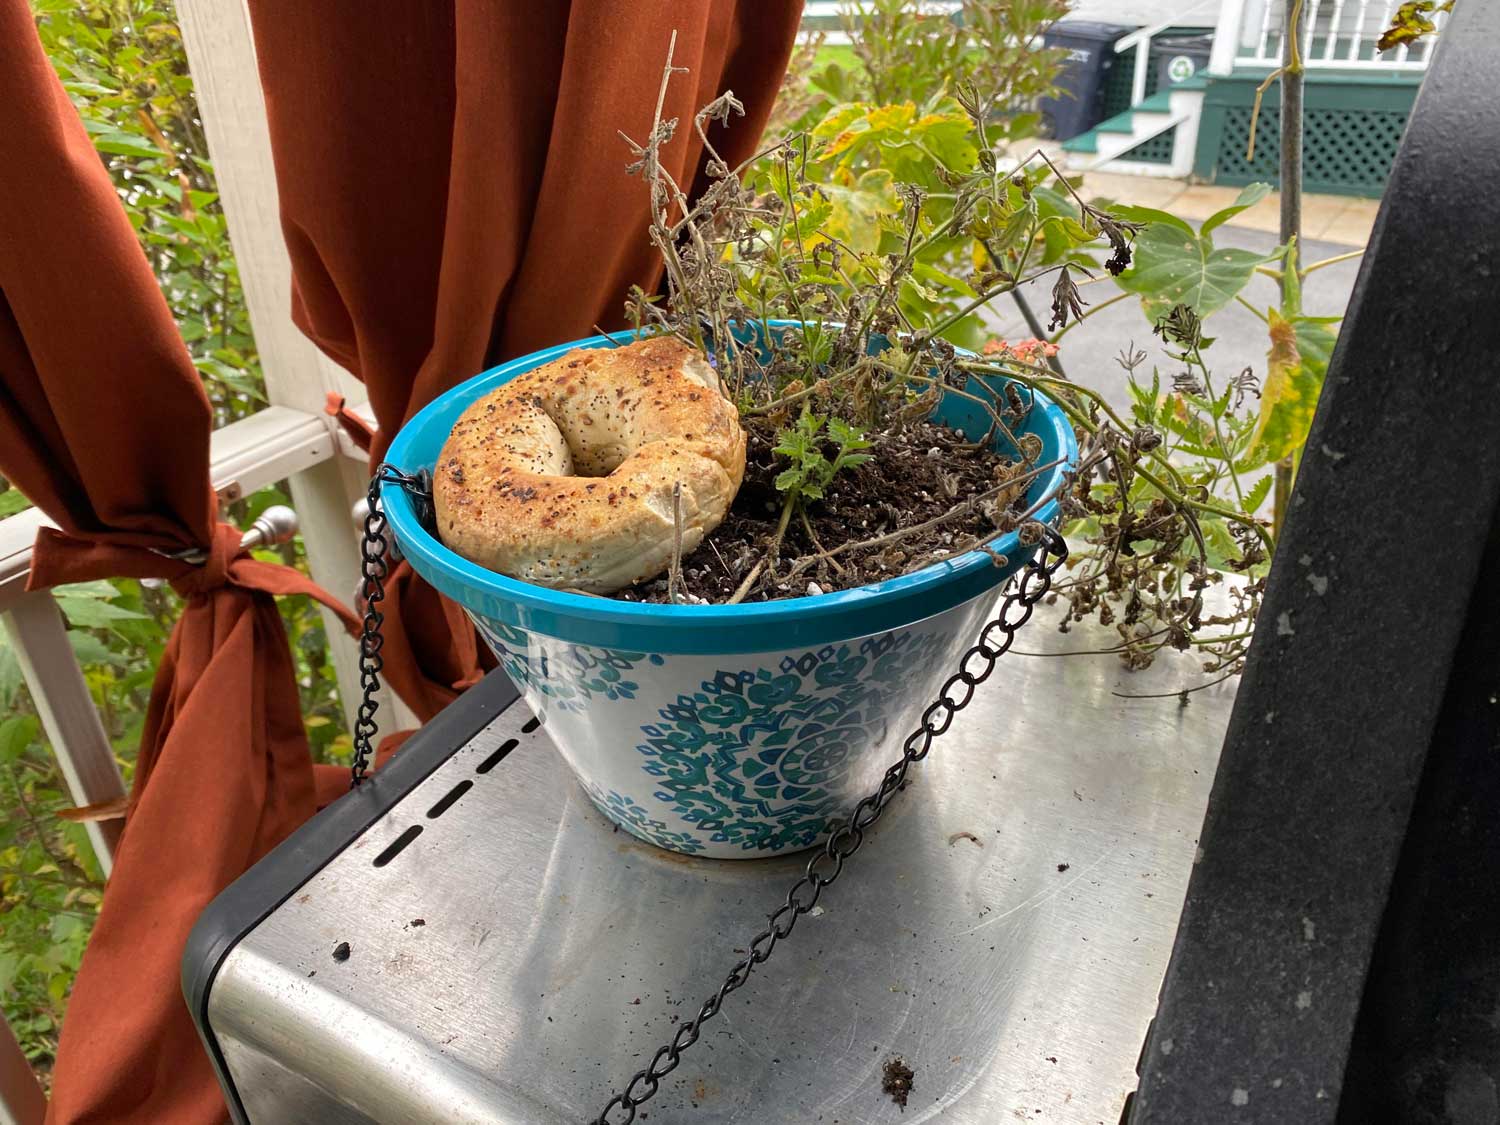 You know you’re a New Yorker when the local squirrels “hide” bagels in your potted plants